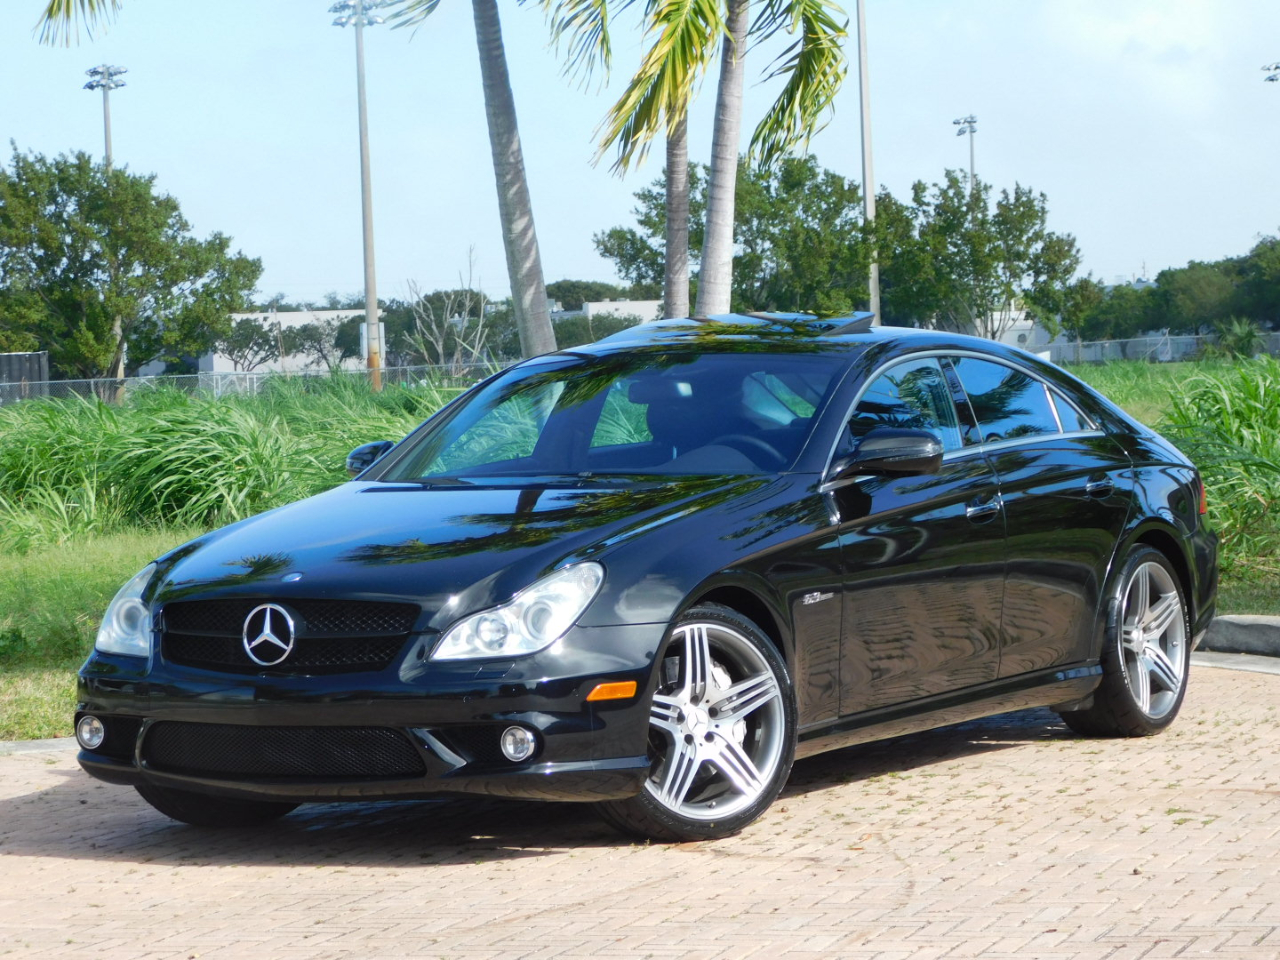 Used 2009 Mercedes-Benz CLS-Class CLS63 AMG for Sale in ...